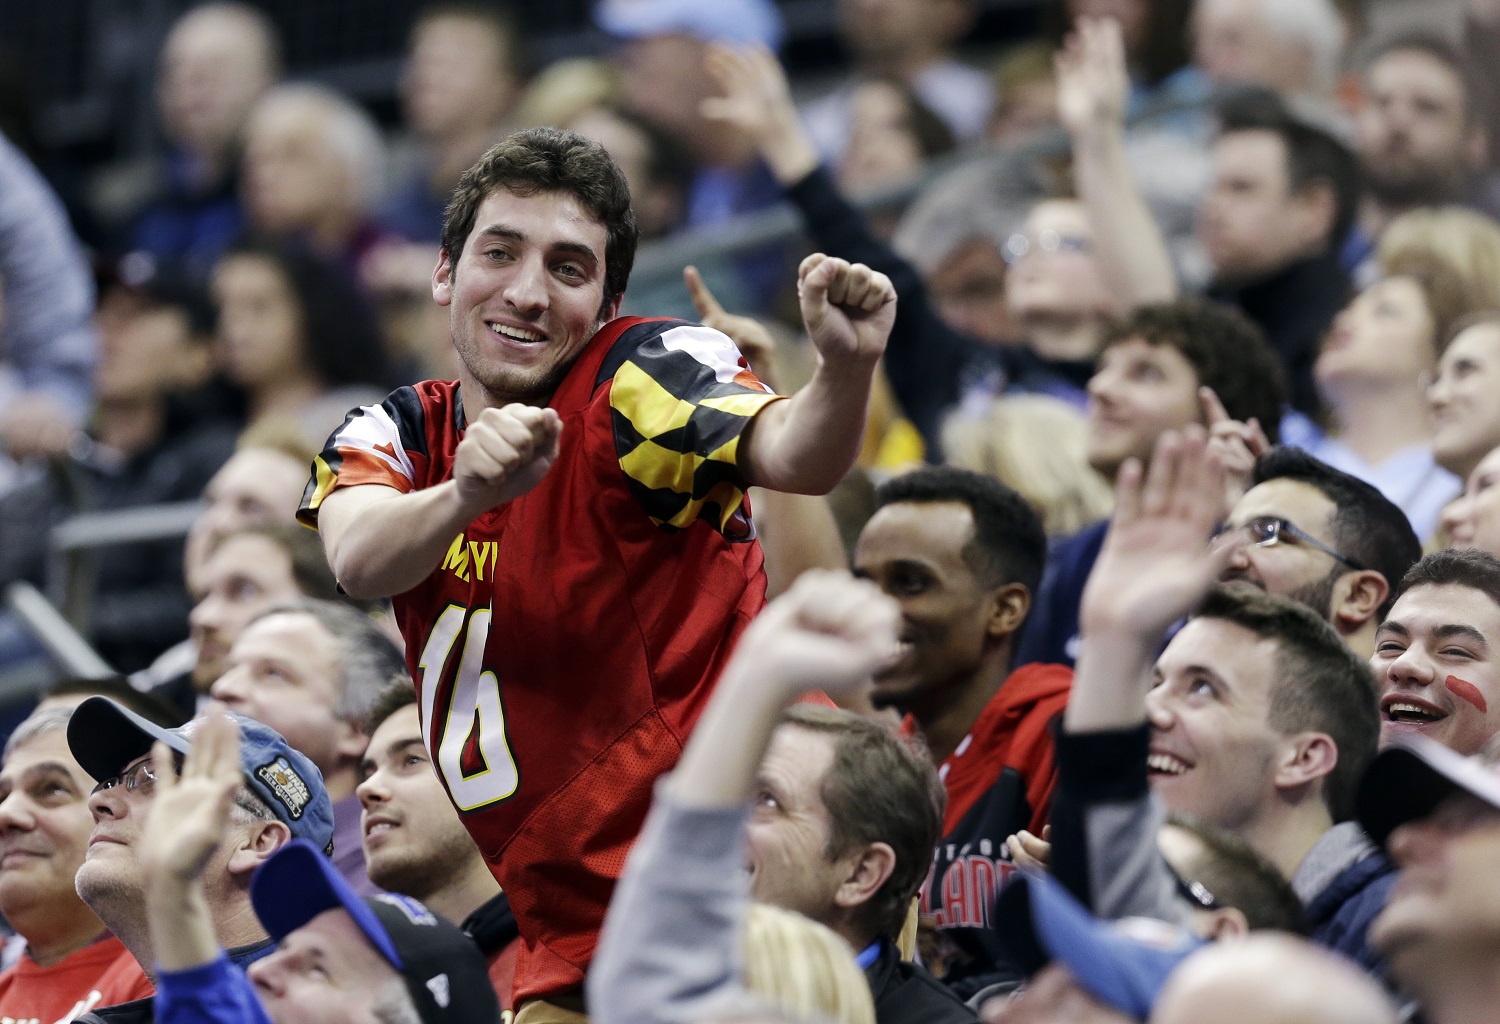 A Maryland fan dances in the crowd during the first half of an NCAA tournament college basketball game against Valparaiso in the Round of 64 in Columbus, Ohio Friday, March 20, 2015. (AP Photo/Tony Dejak)